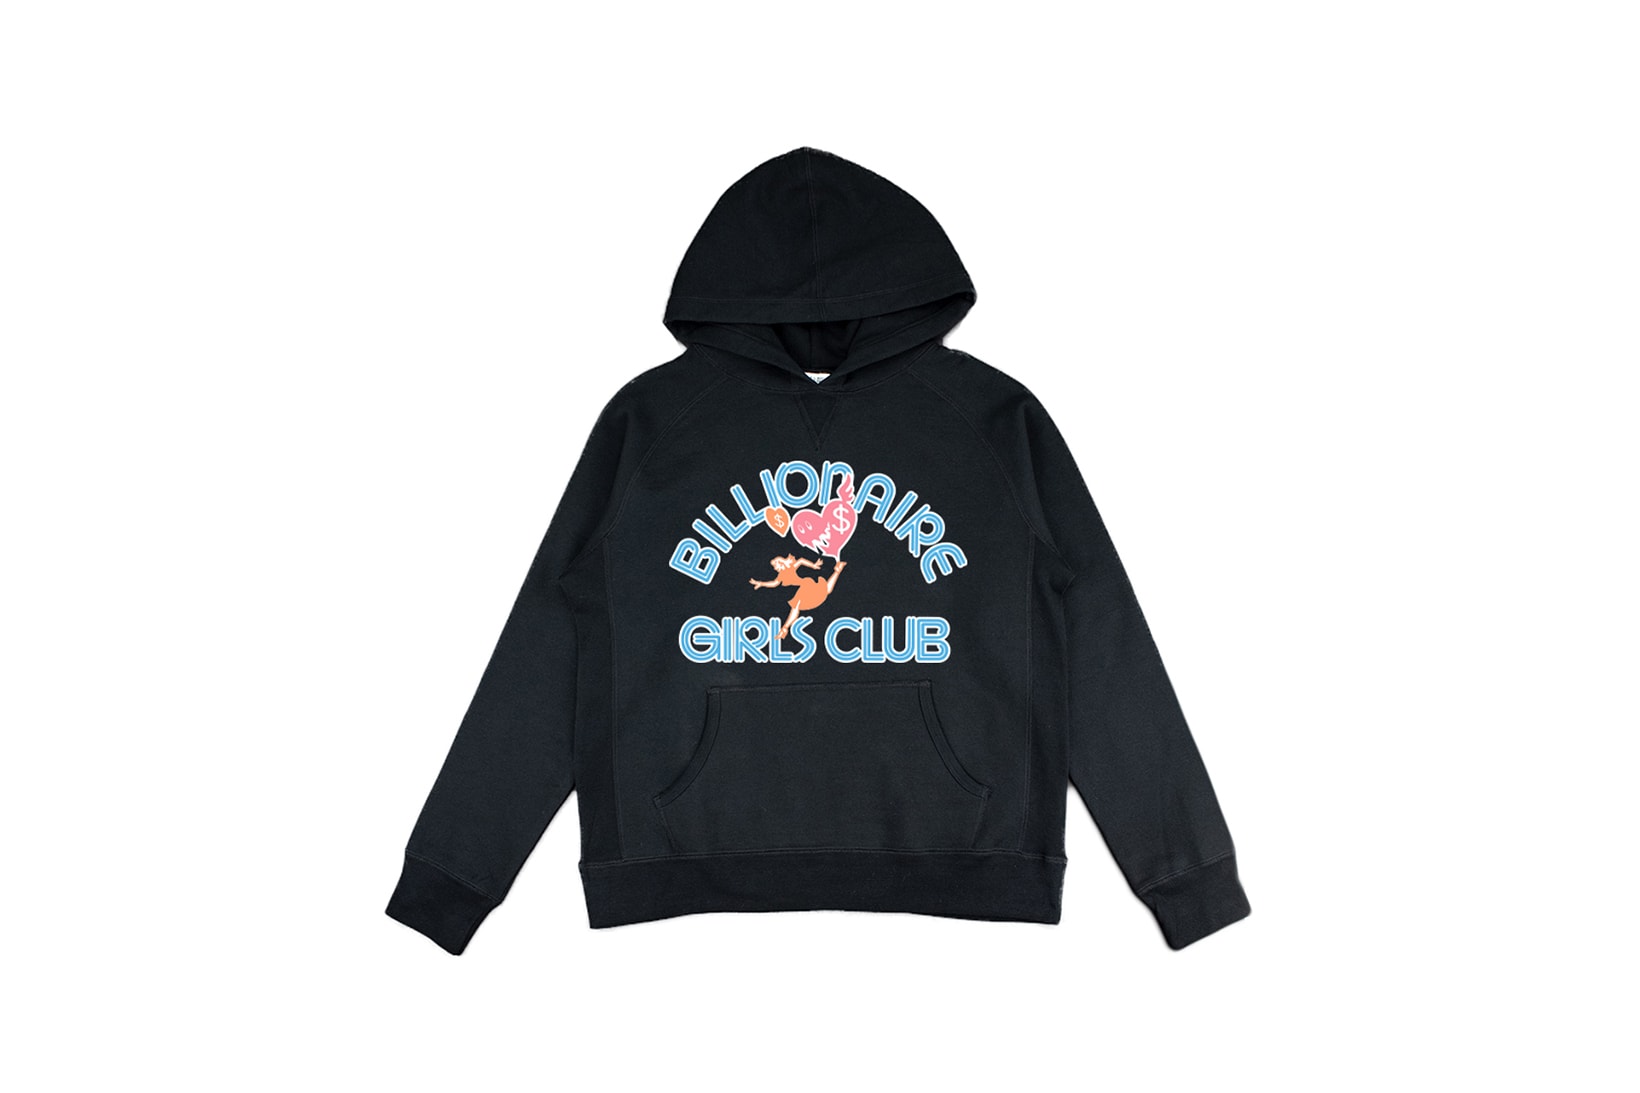 Billionaire Girls Club Relaunch Capsule Collection Hoodie Black